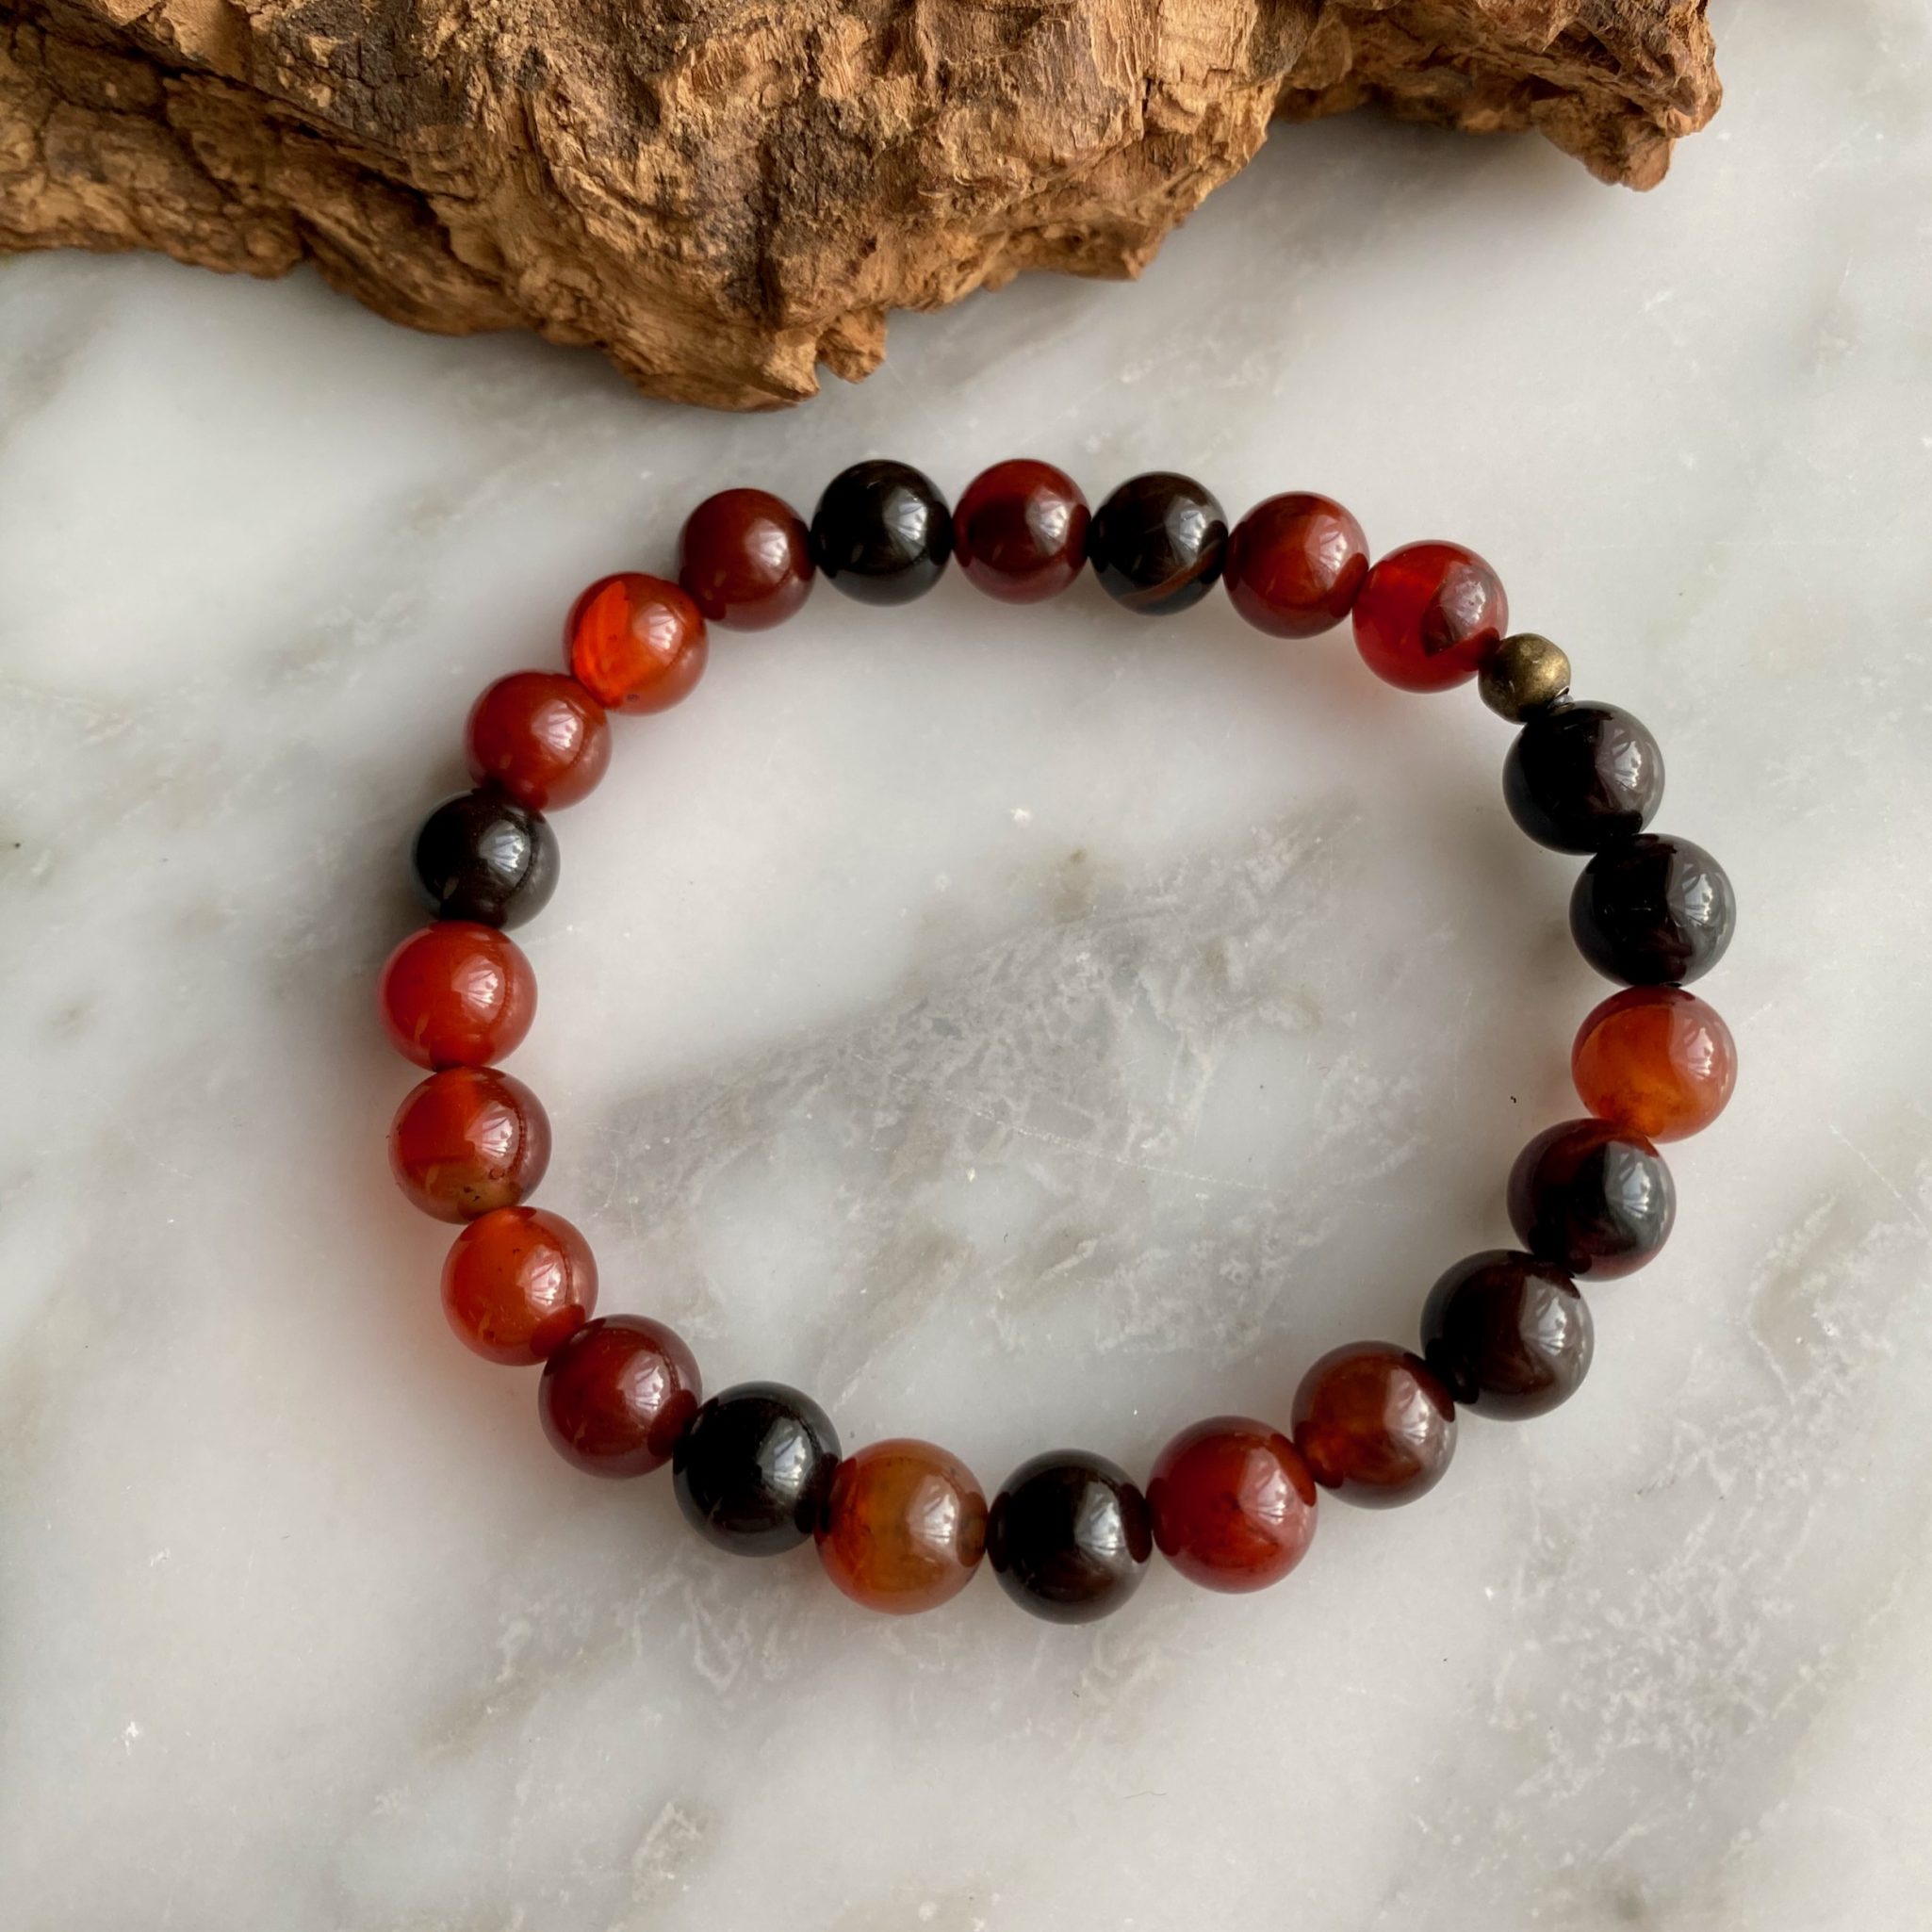 Confidence Building Fiery Red Agate Leather Beaded Bracelet - Anxiety Gone